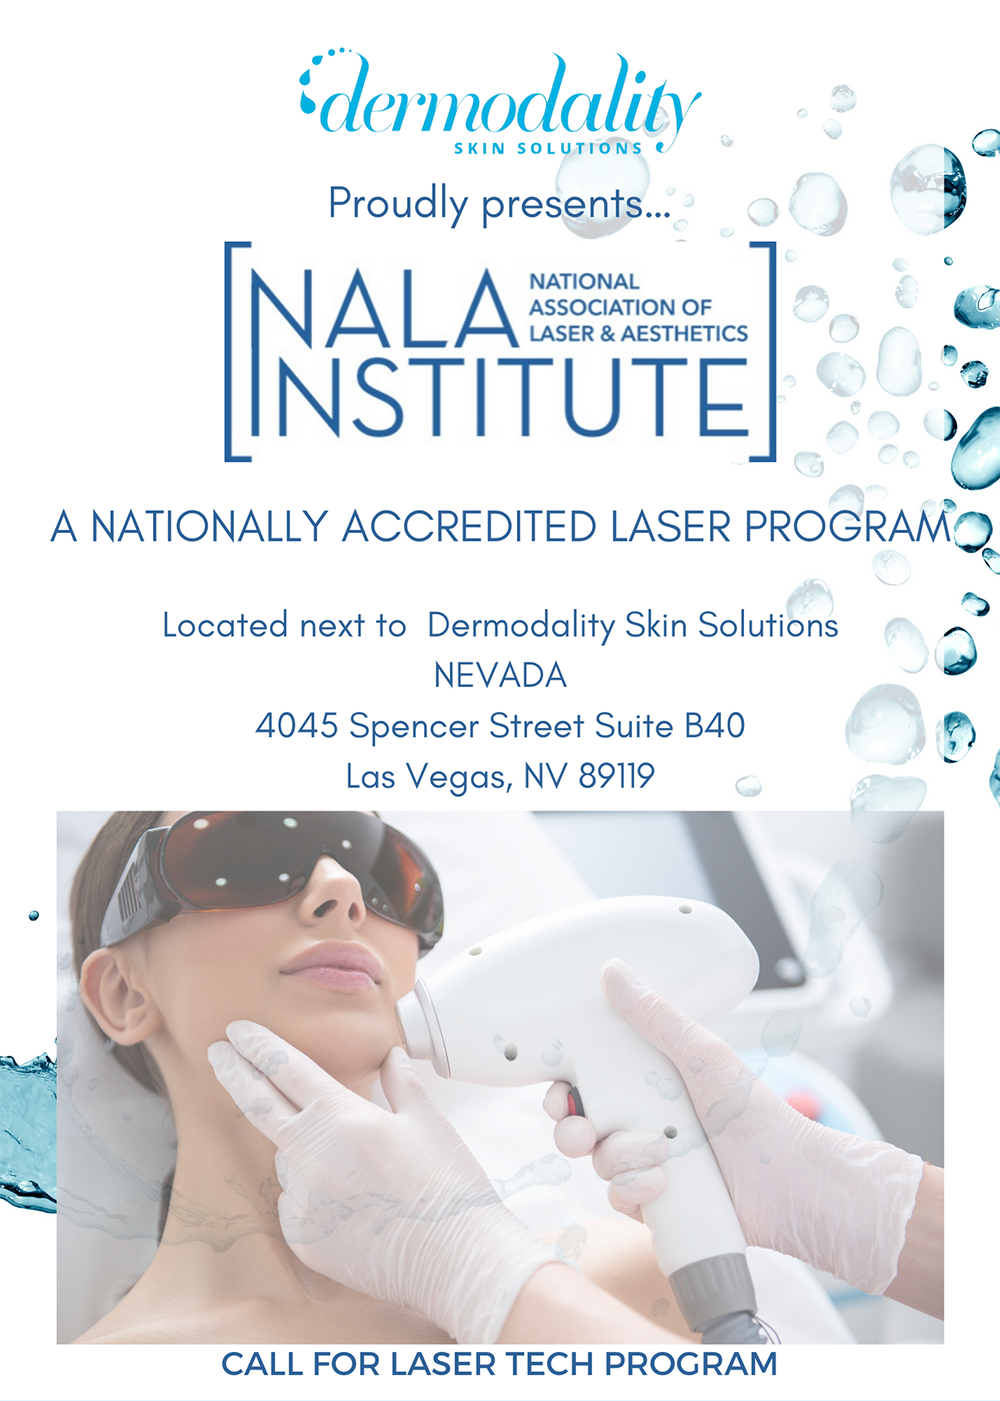 Dermodality Skin Solutions - Proudly Presents NALA institute